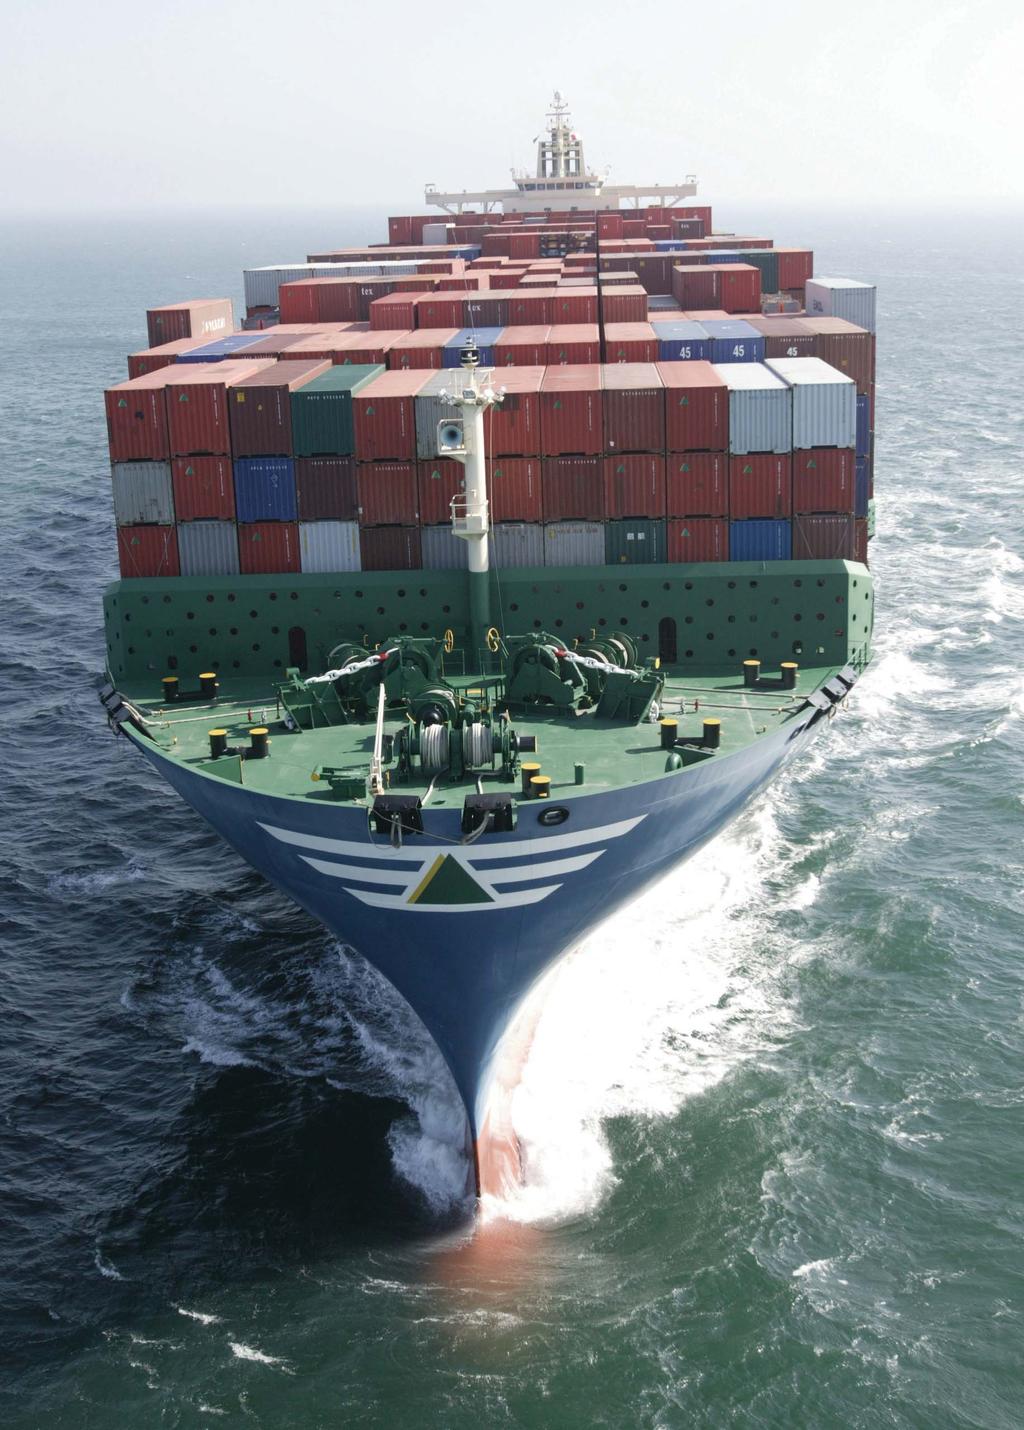 A Multi-Level Approach to Service ABS service delivery consists of three categories tailored to meet the specific needs of owners and operators of containerships.